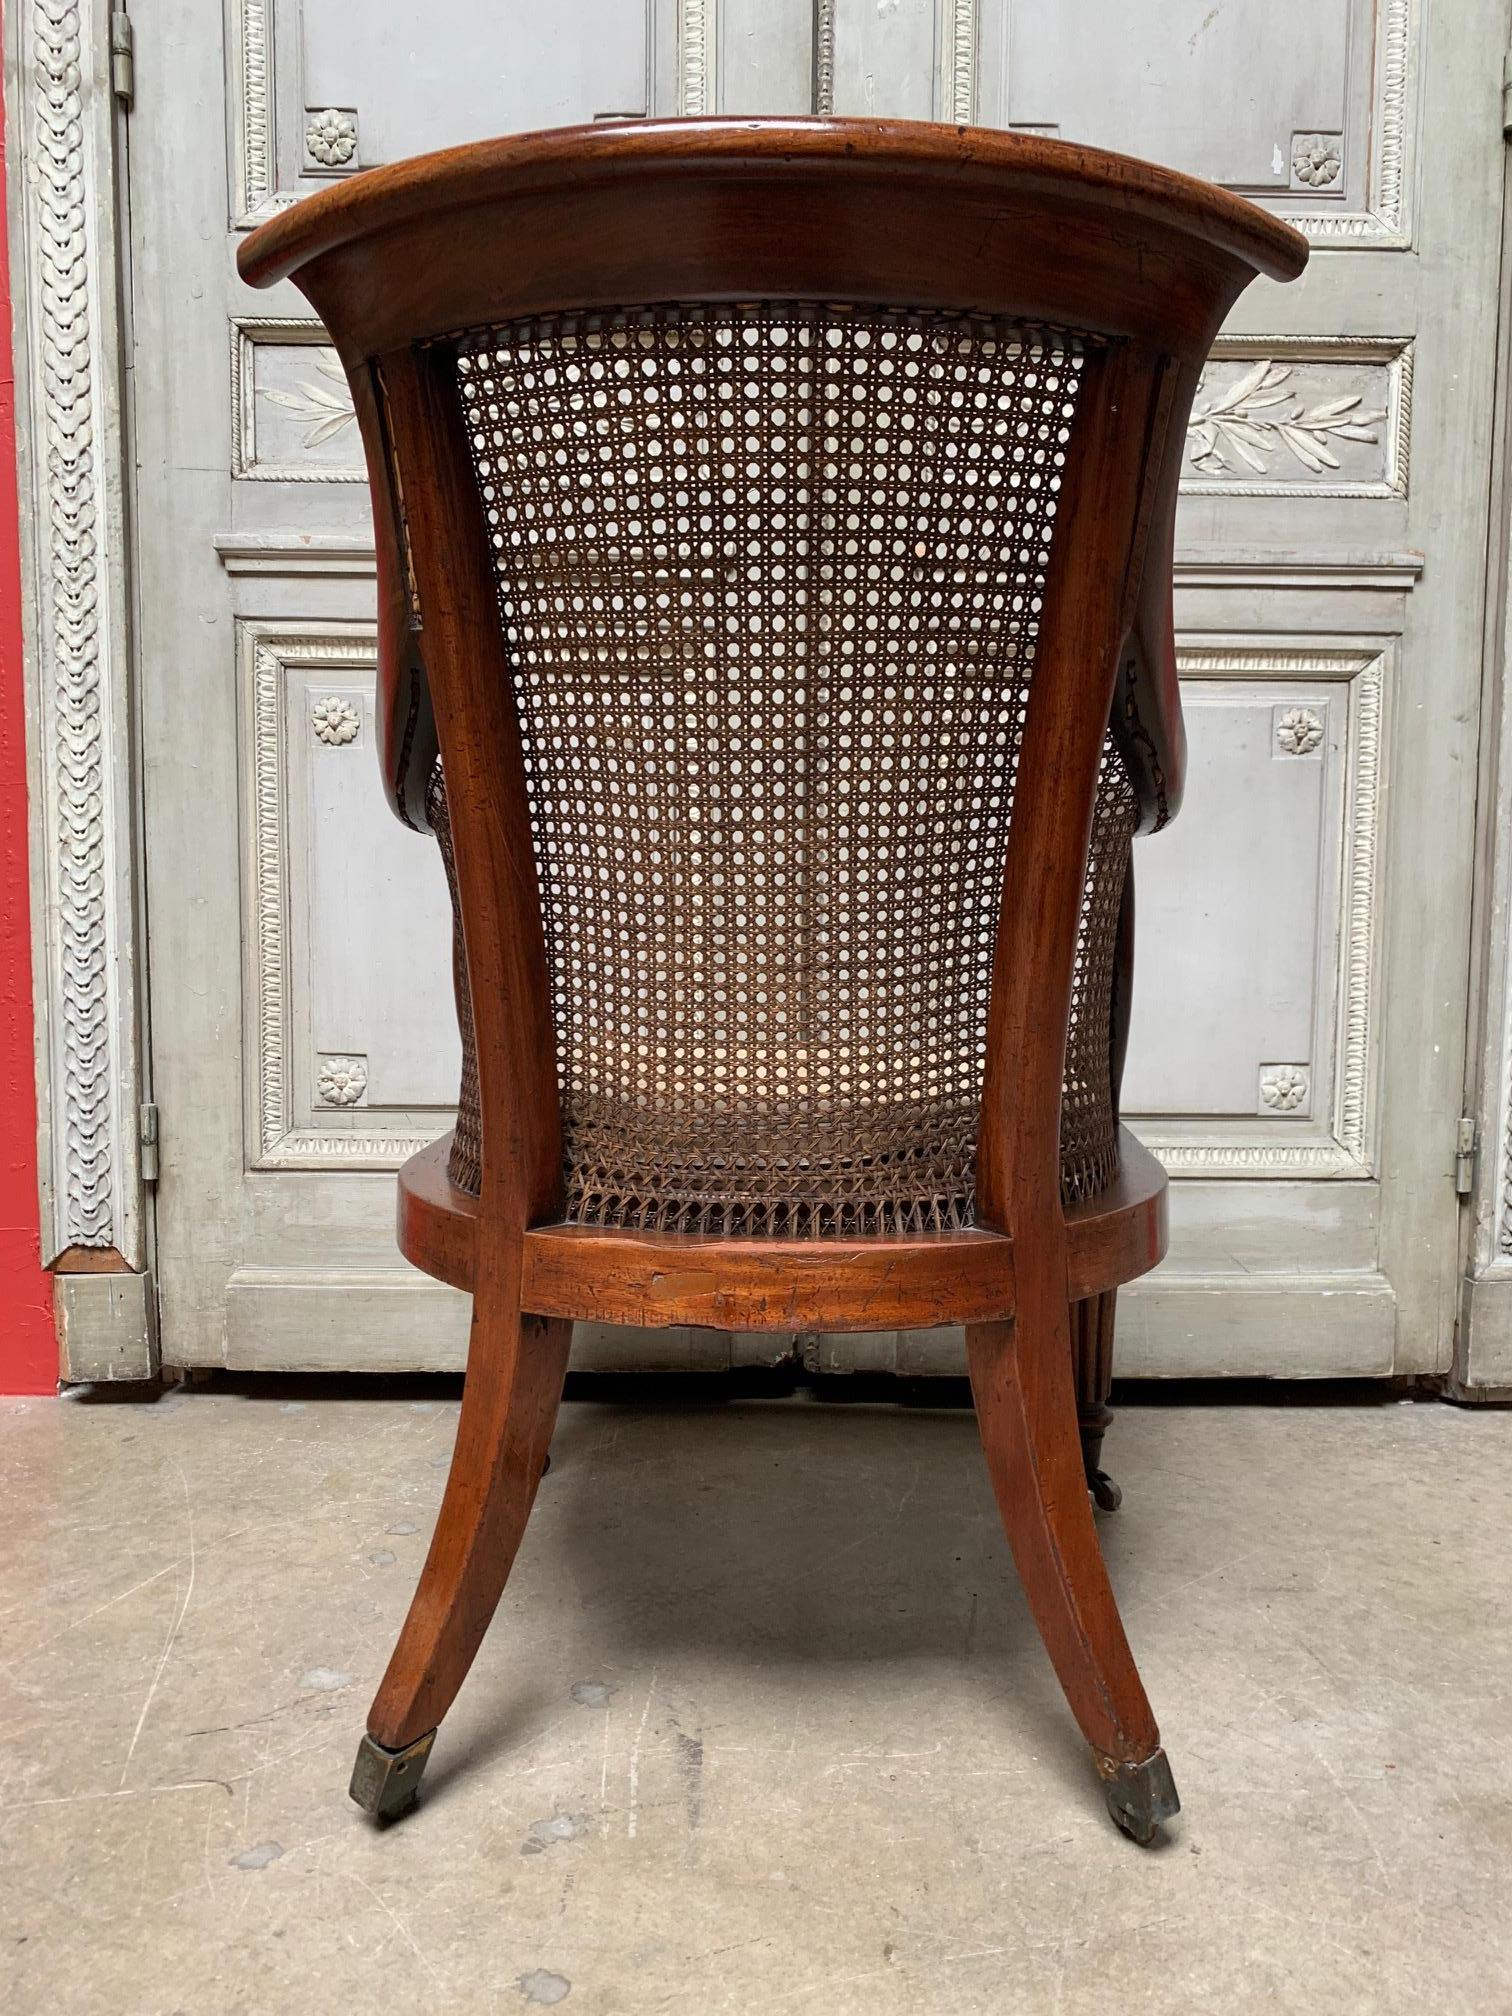 Carved 19th Century English William IV Walnut Library Chair with Cane